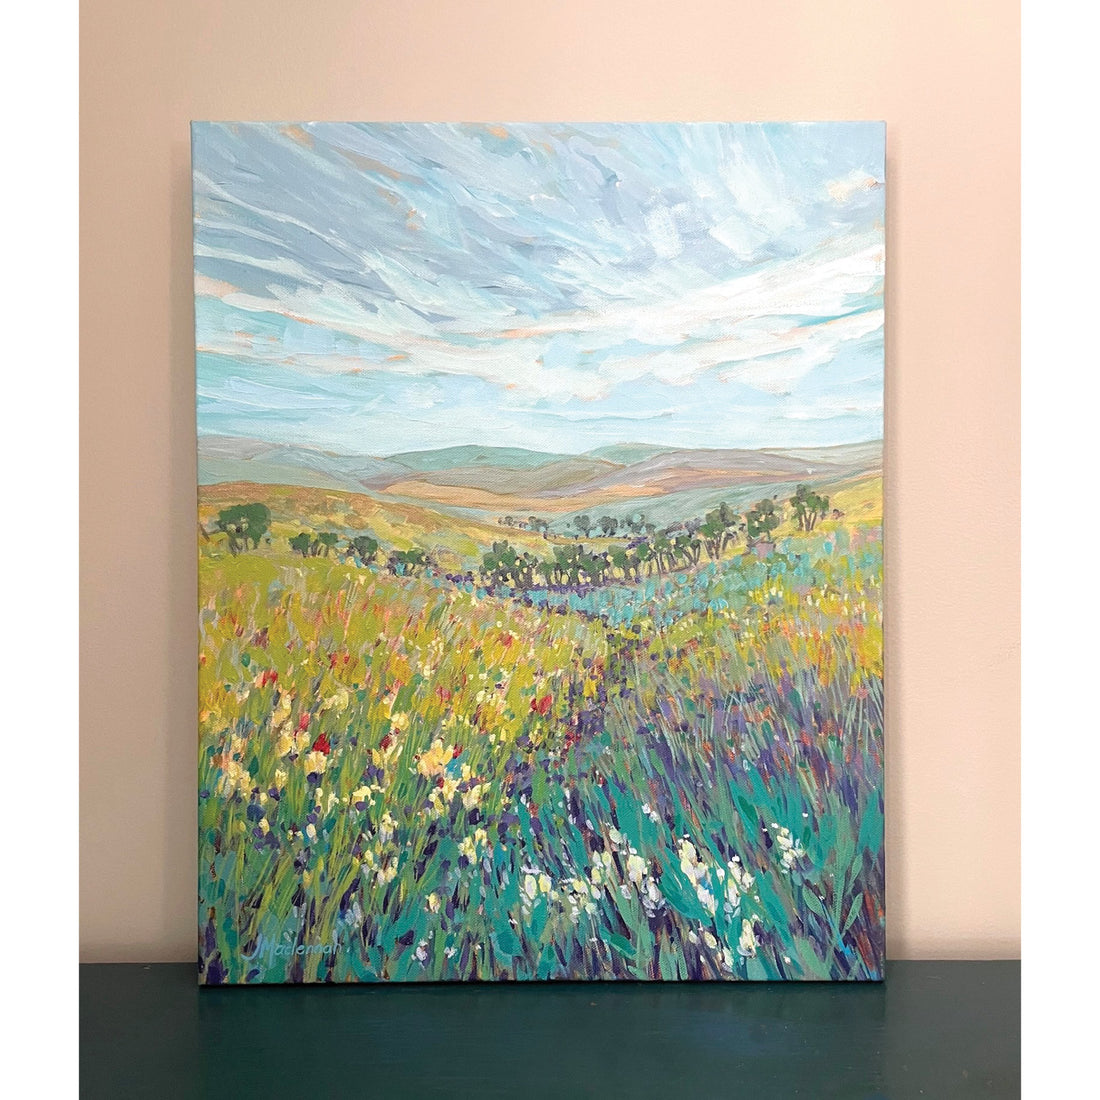 Joanne MacLennan "Spring In My Step" abstract landscape painting Canadian Artist